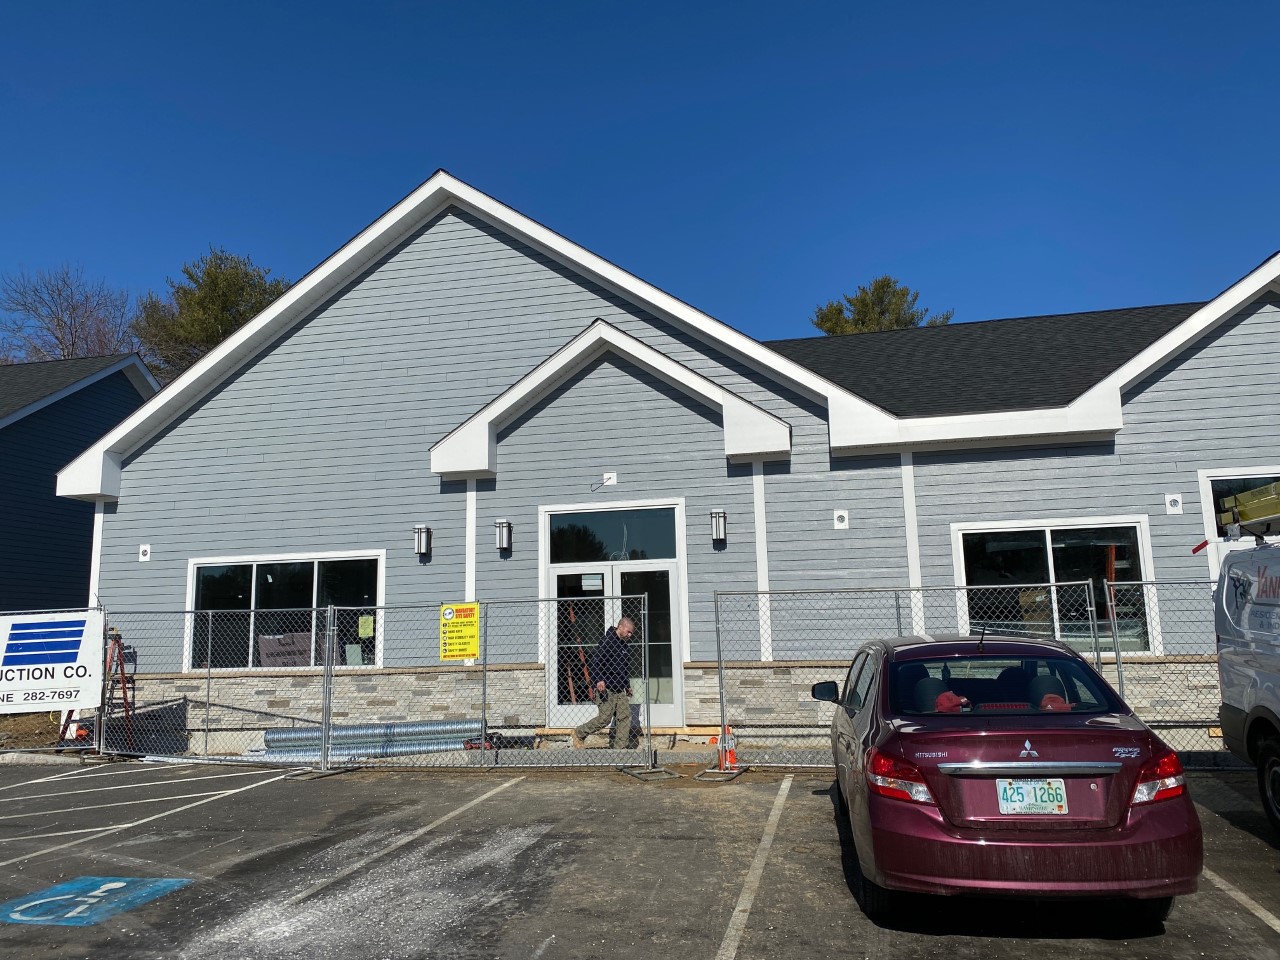 New clinic set to open